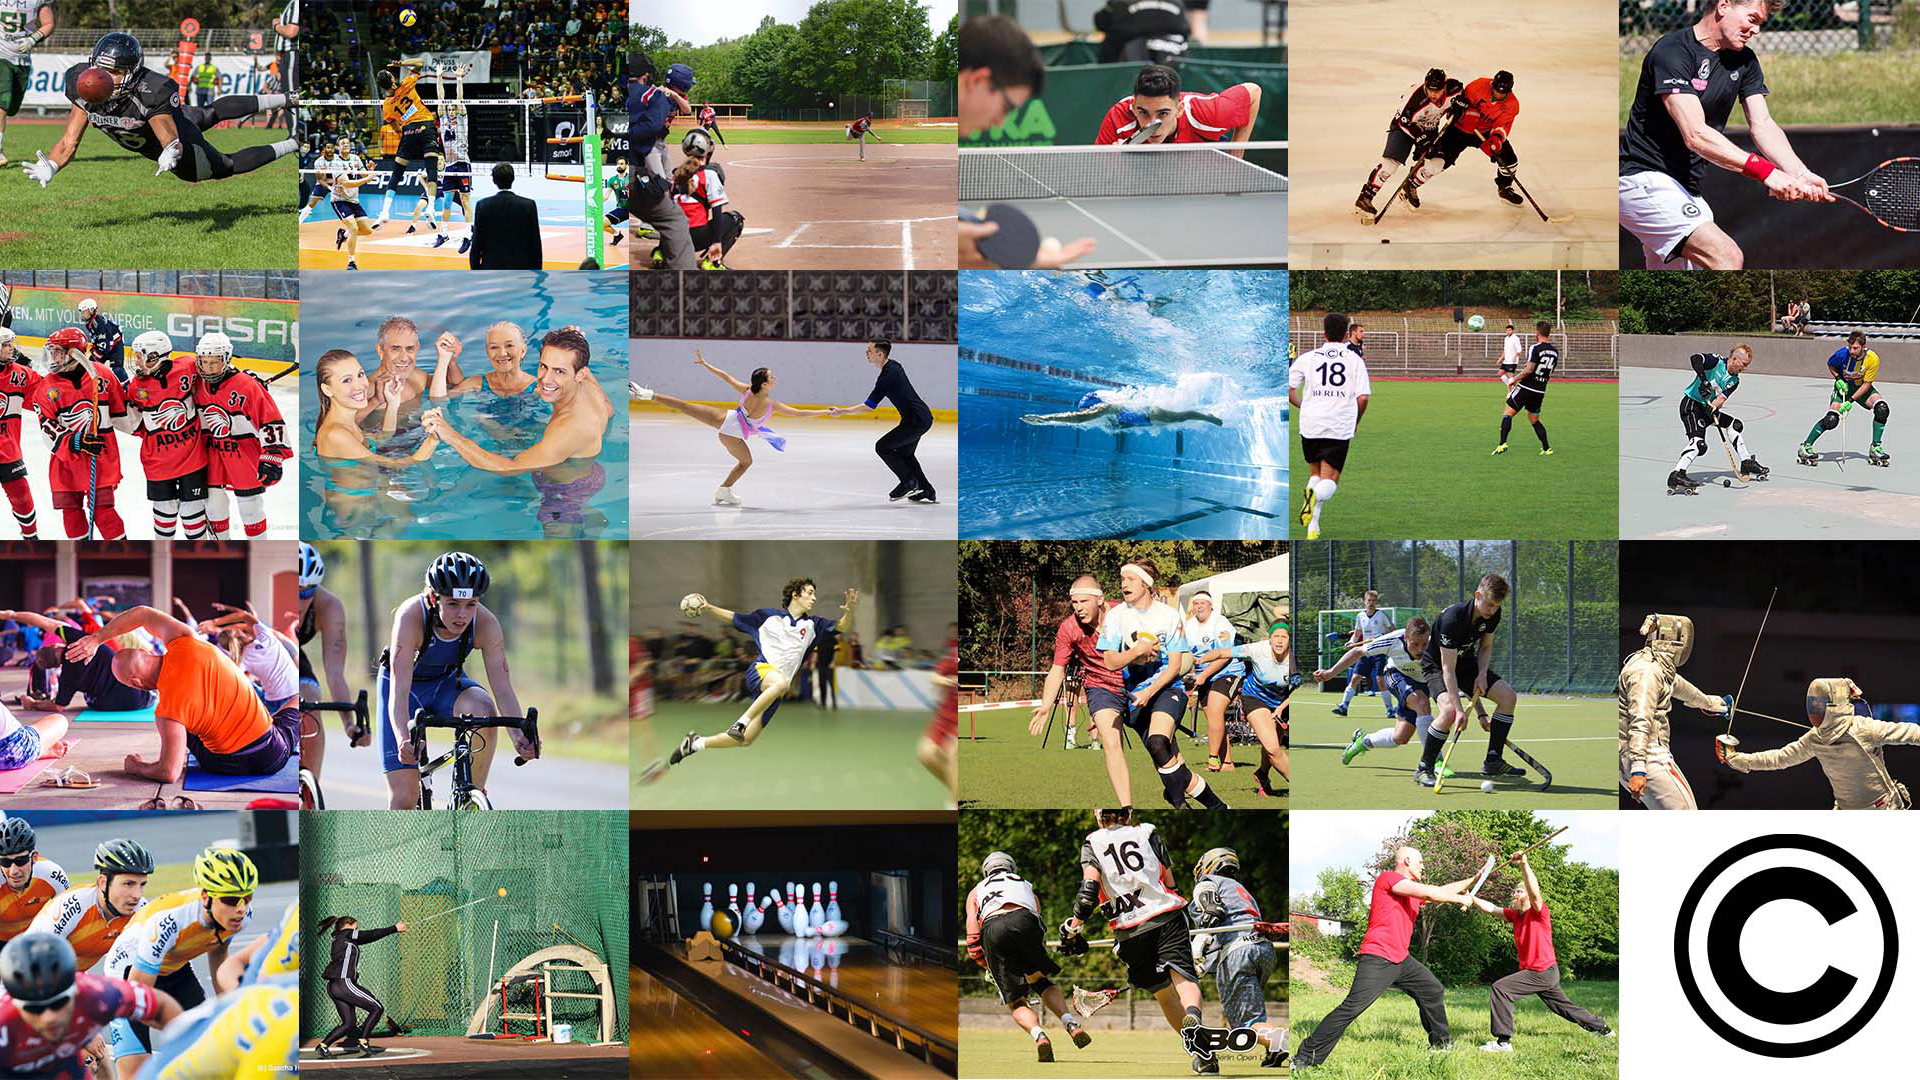 Range of sports offered by SCC BERLIN. 23 different sports offered at SCC BERLIN. ©SCC e.V. Berlin / SCC EVENTS